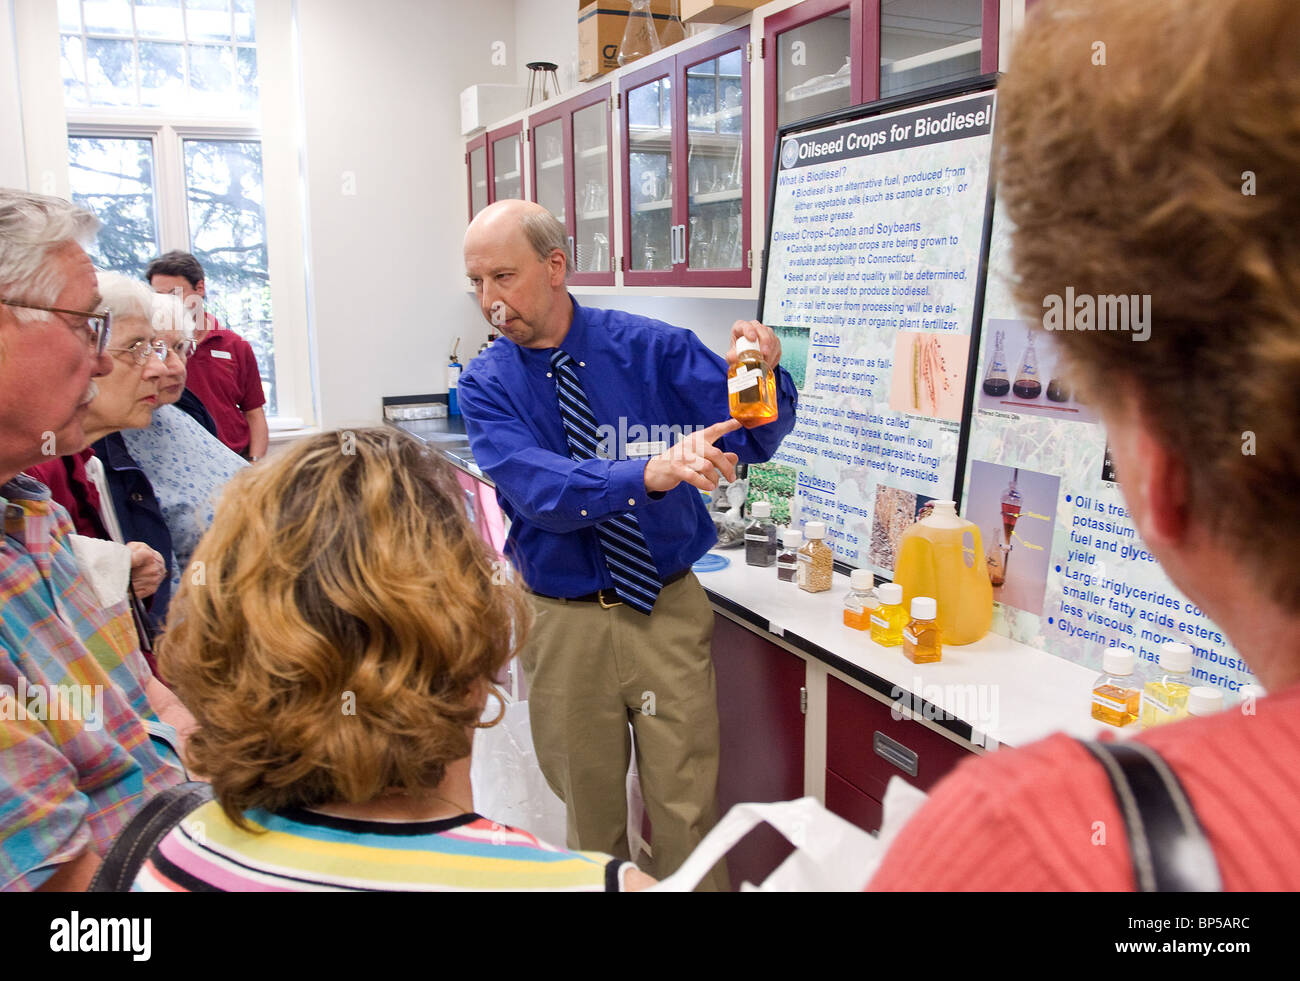 A scientist explains biodiesel  fuels made from grains at the CT Agricultural Center in New Haven CT USA Stock Photo